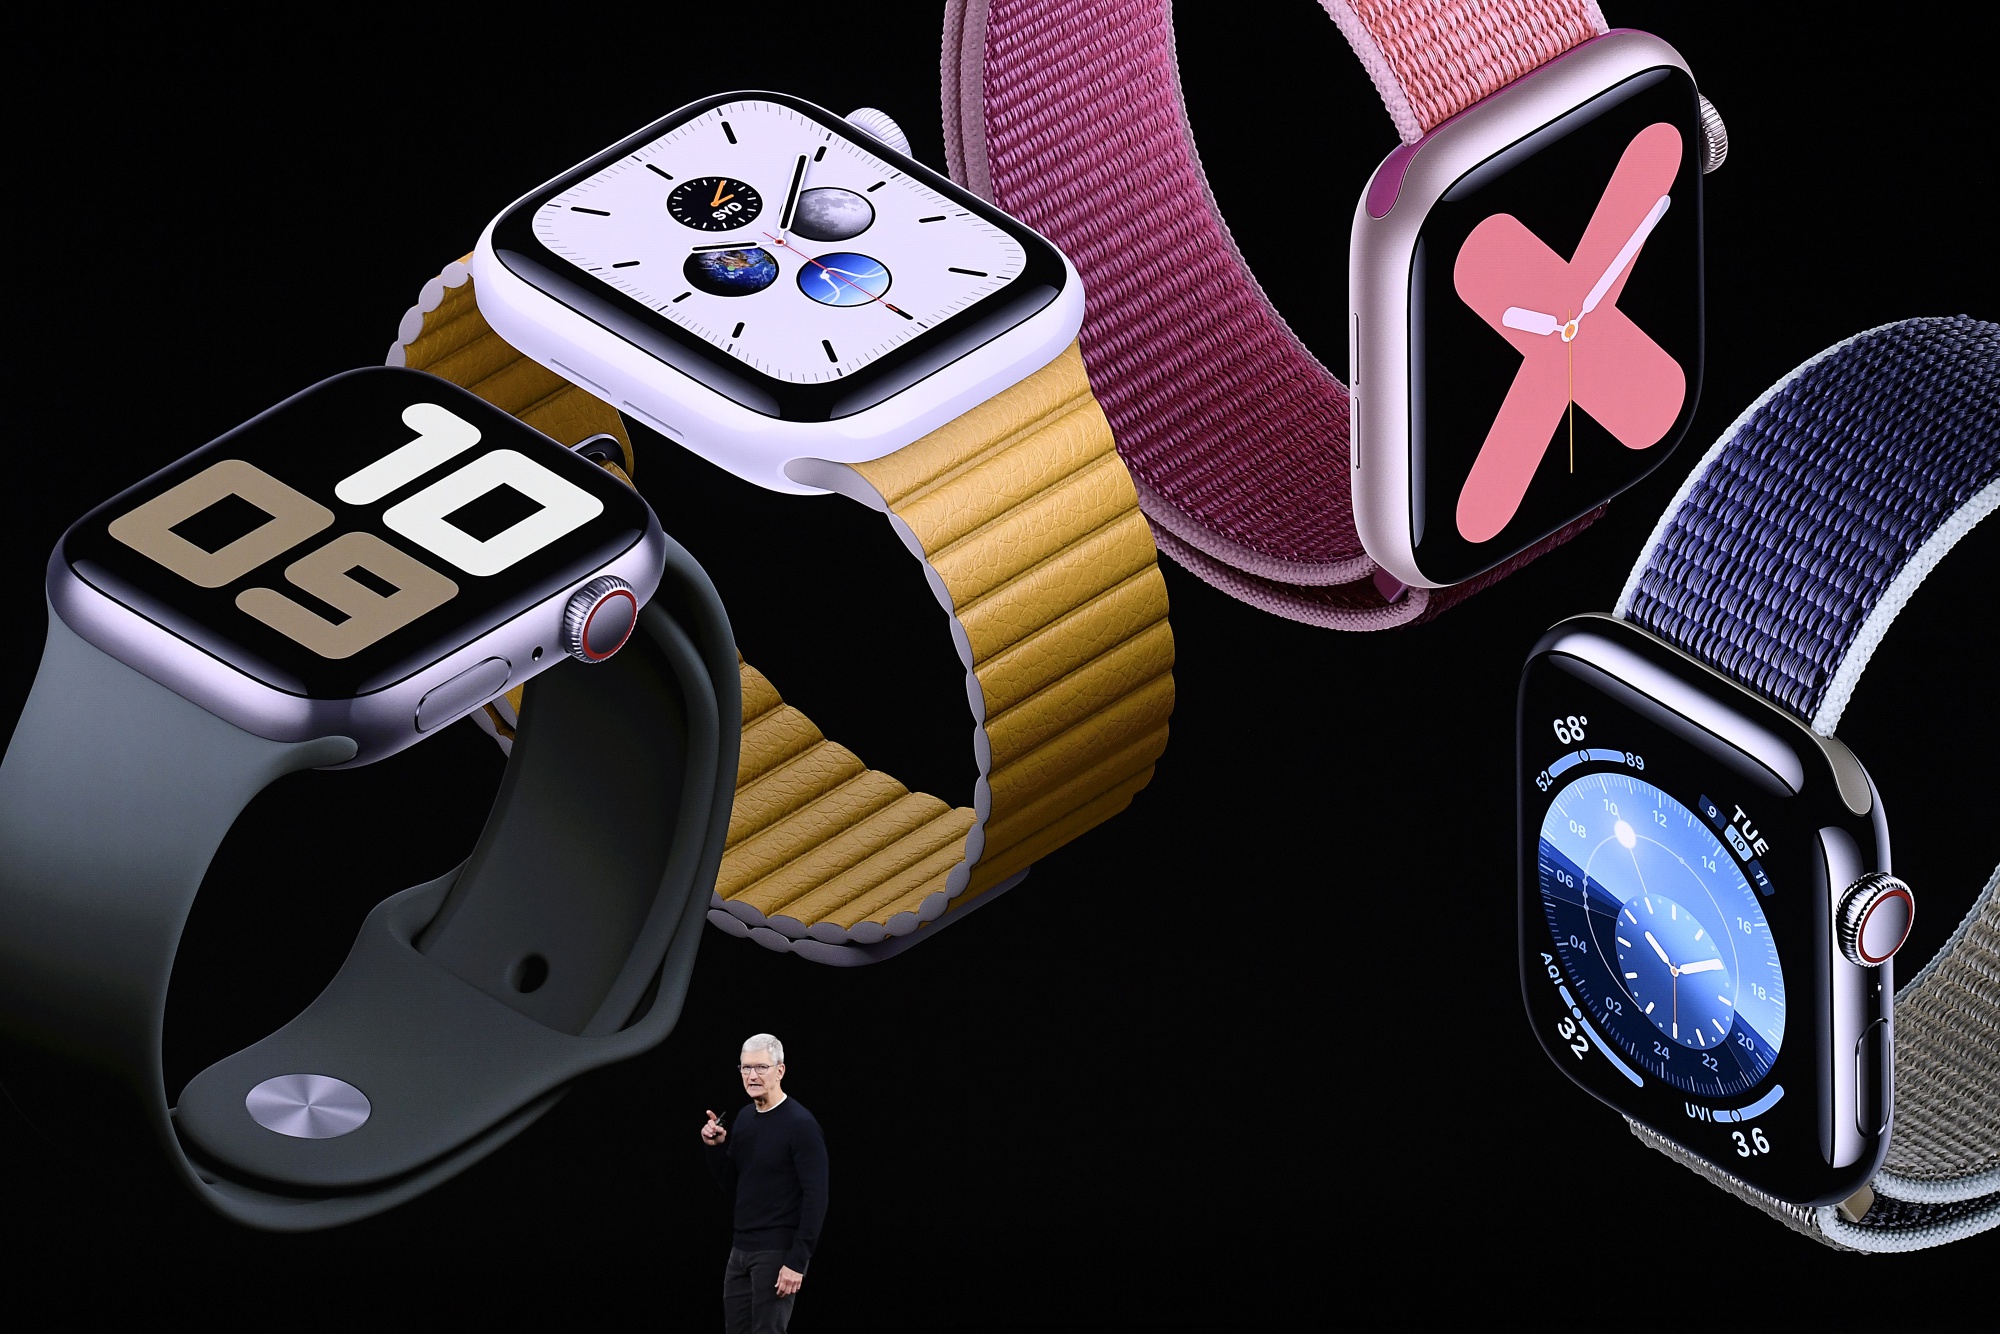 Tim Cook talks about the Apple Watch on Sept. 10.